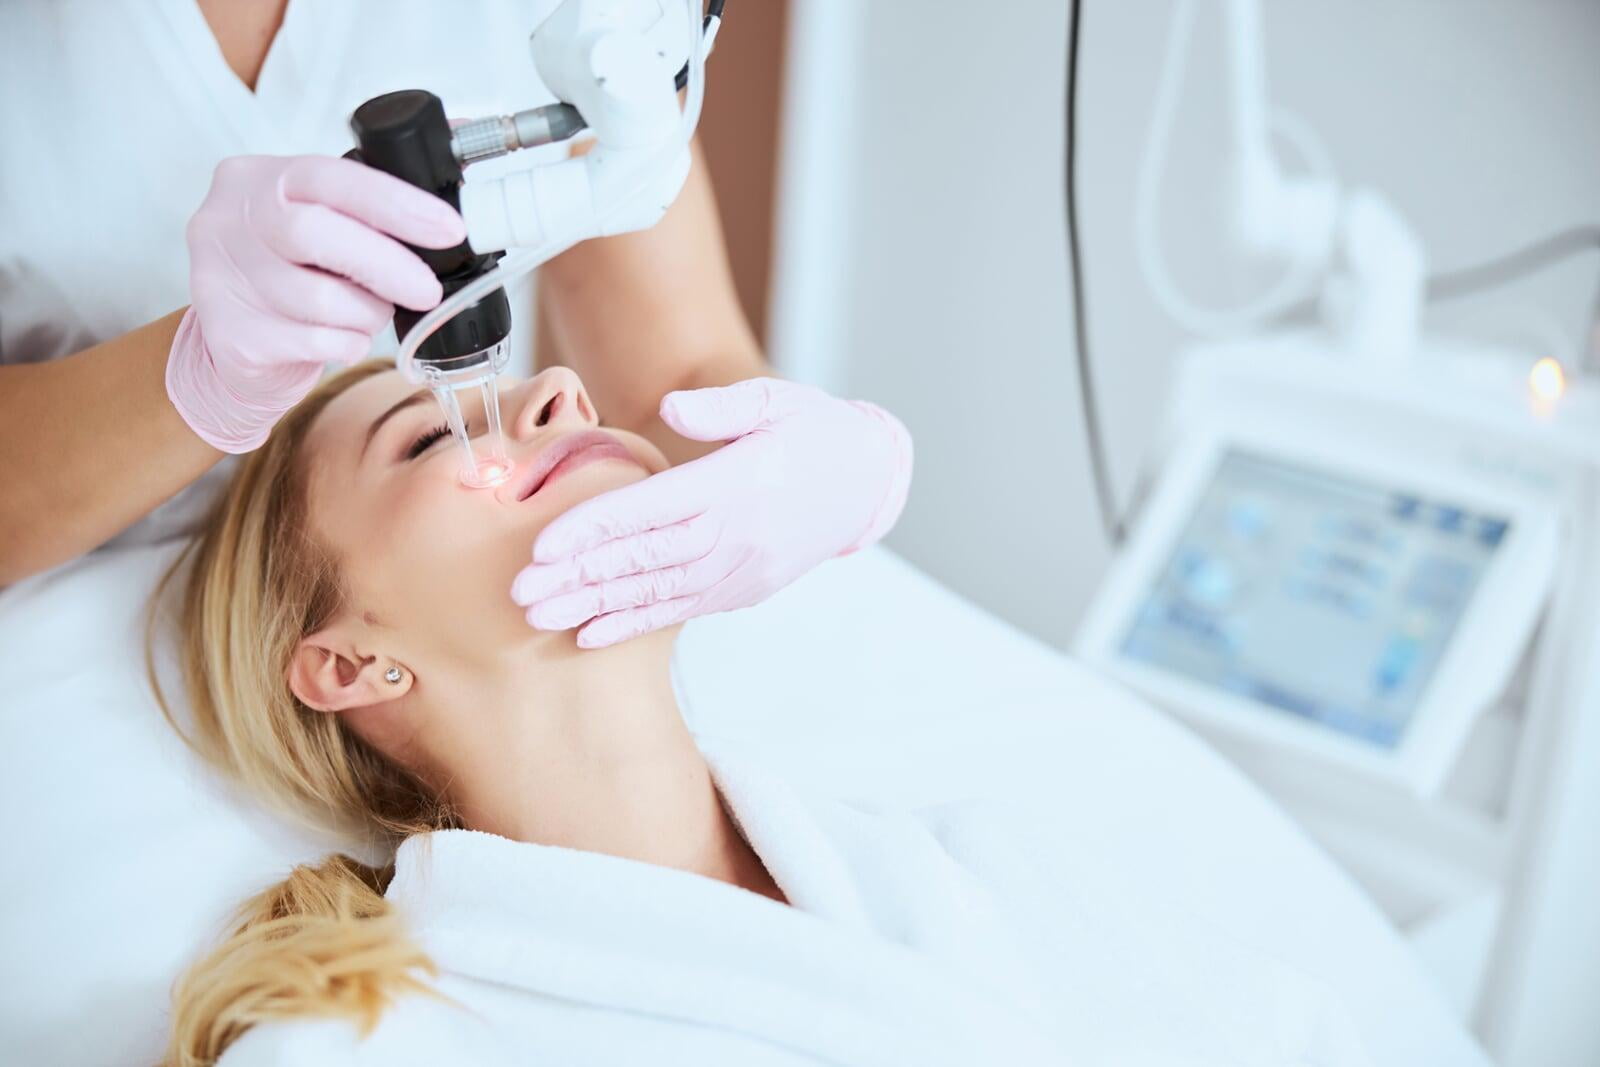 CO2 Laser: How Does It Improve Your Skin?